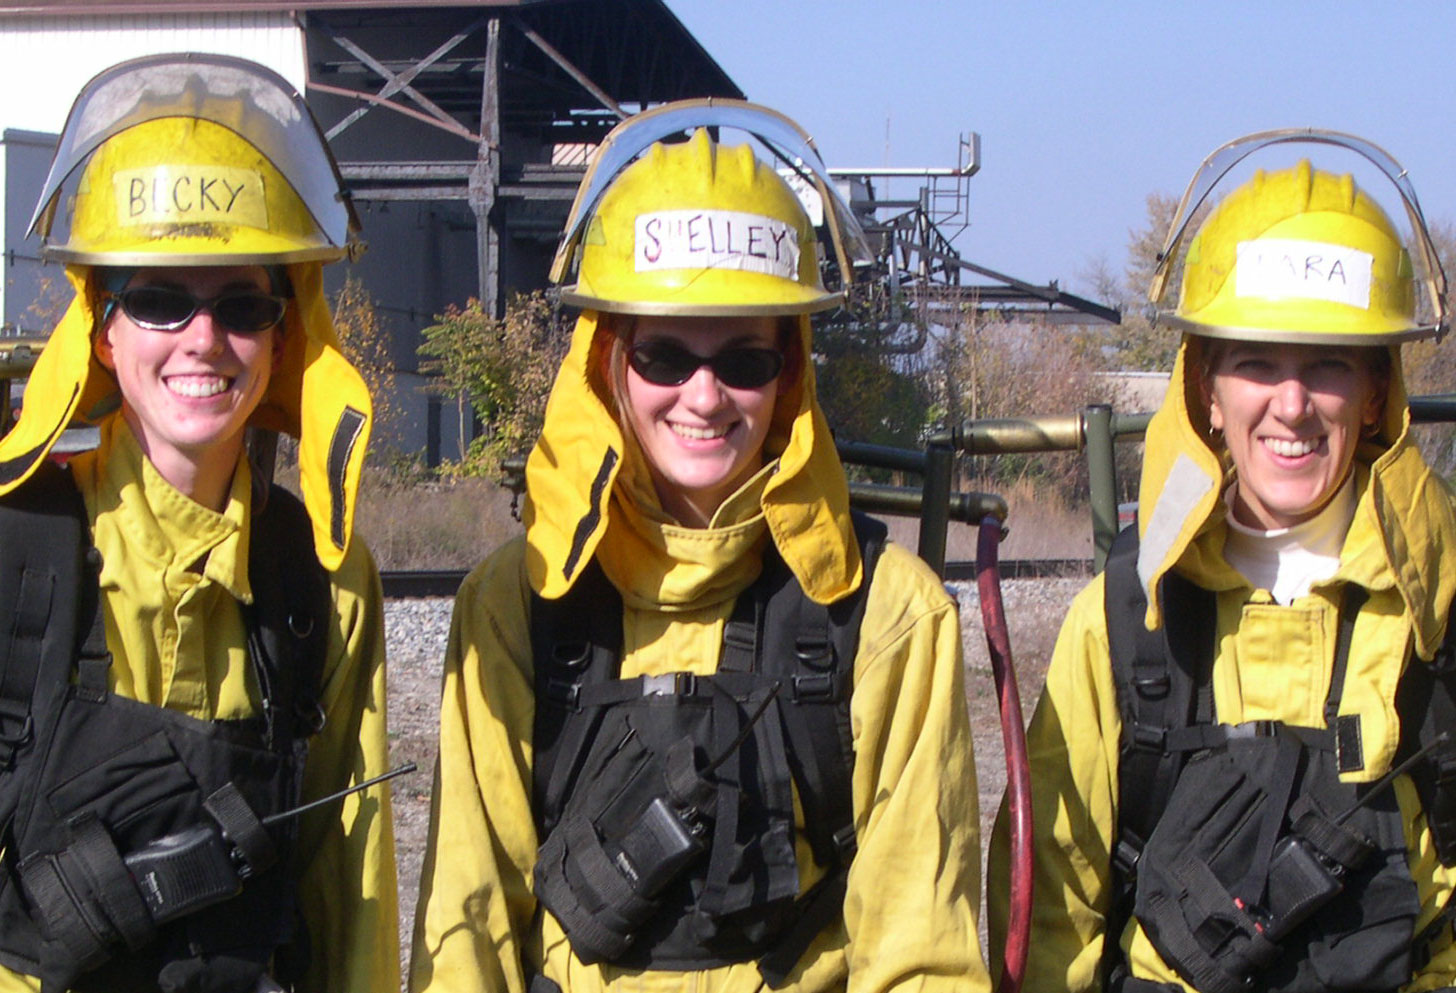 Becky (left), Shelley (center), and Lara (right) on the burn crew